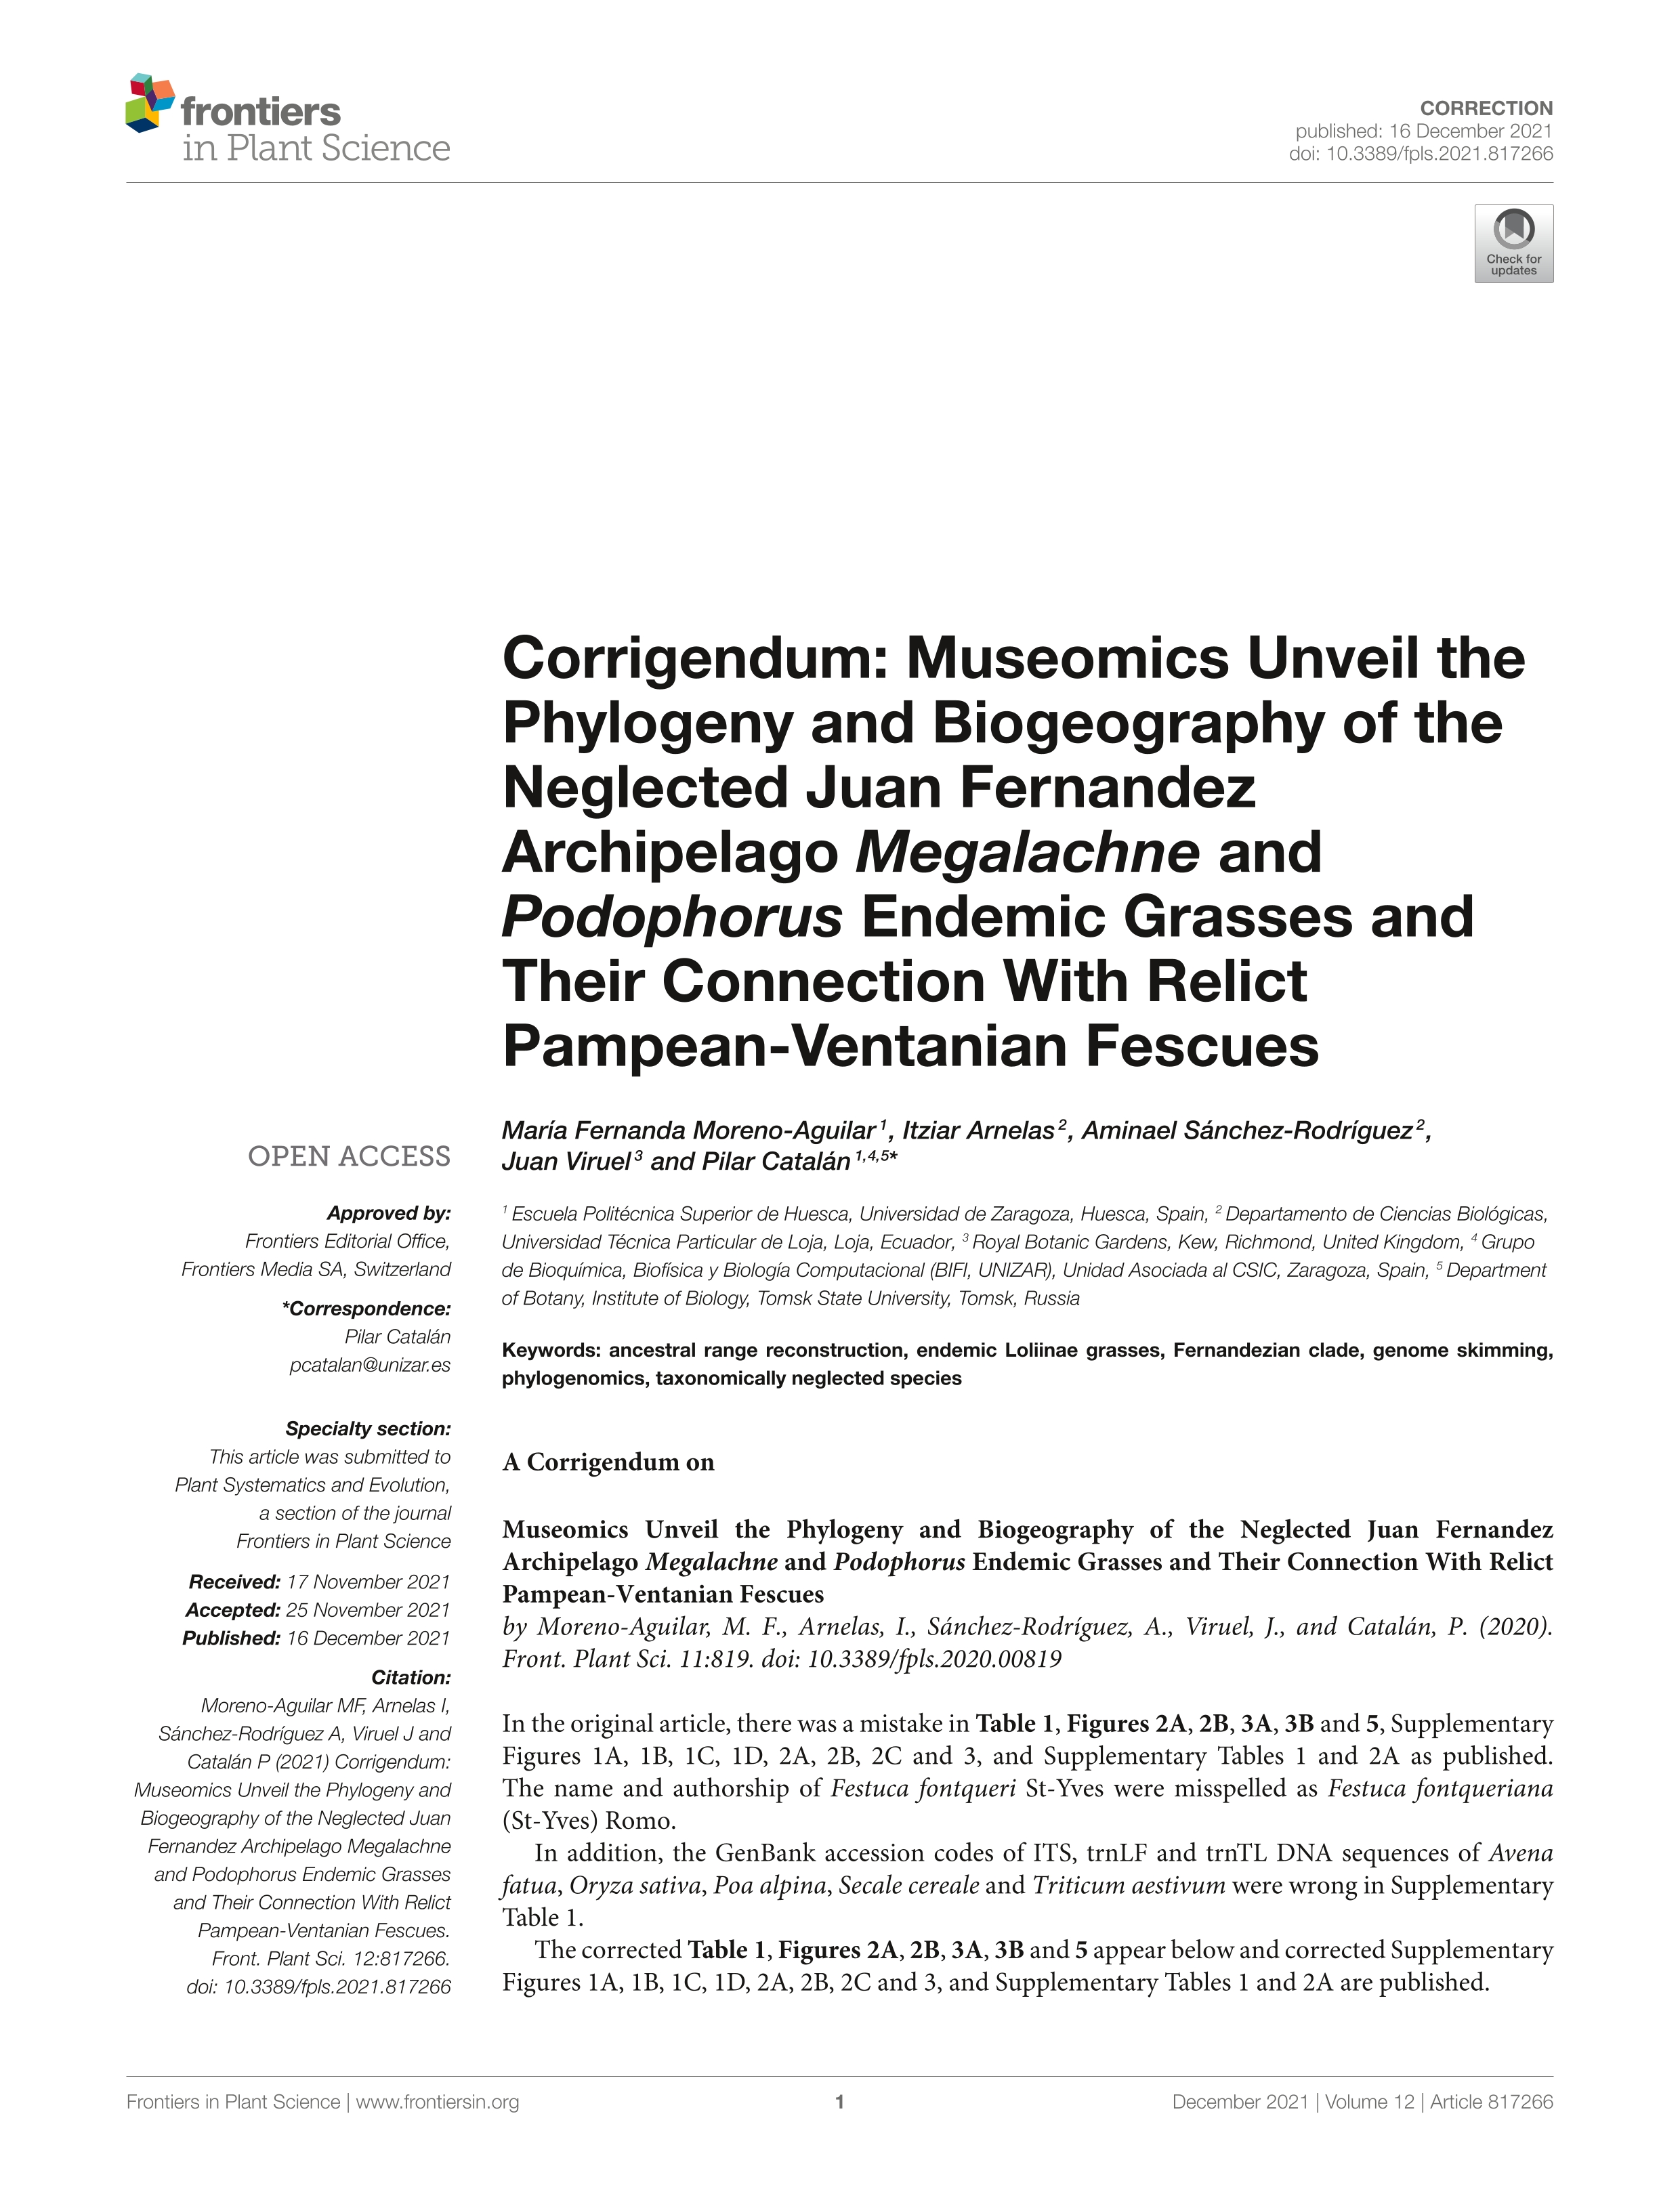 Corrigendum: Museomics Unveil the Phylogeny and Biogeography of the Neglected Juan Fernandez Archipelago Megalachne and Podophorus Endemic Grasses and Their Connection With Relict Pampean-Ventanian Fescues